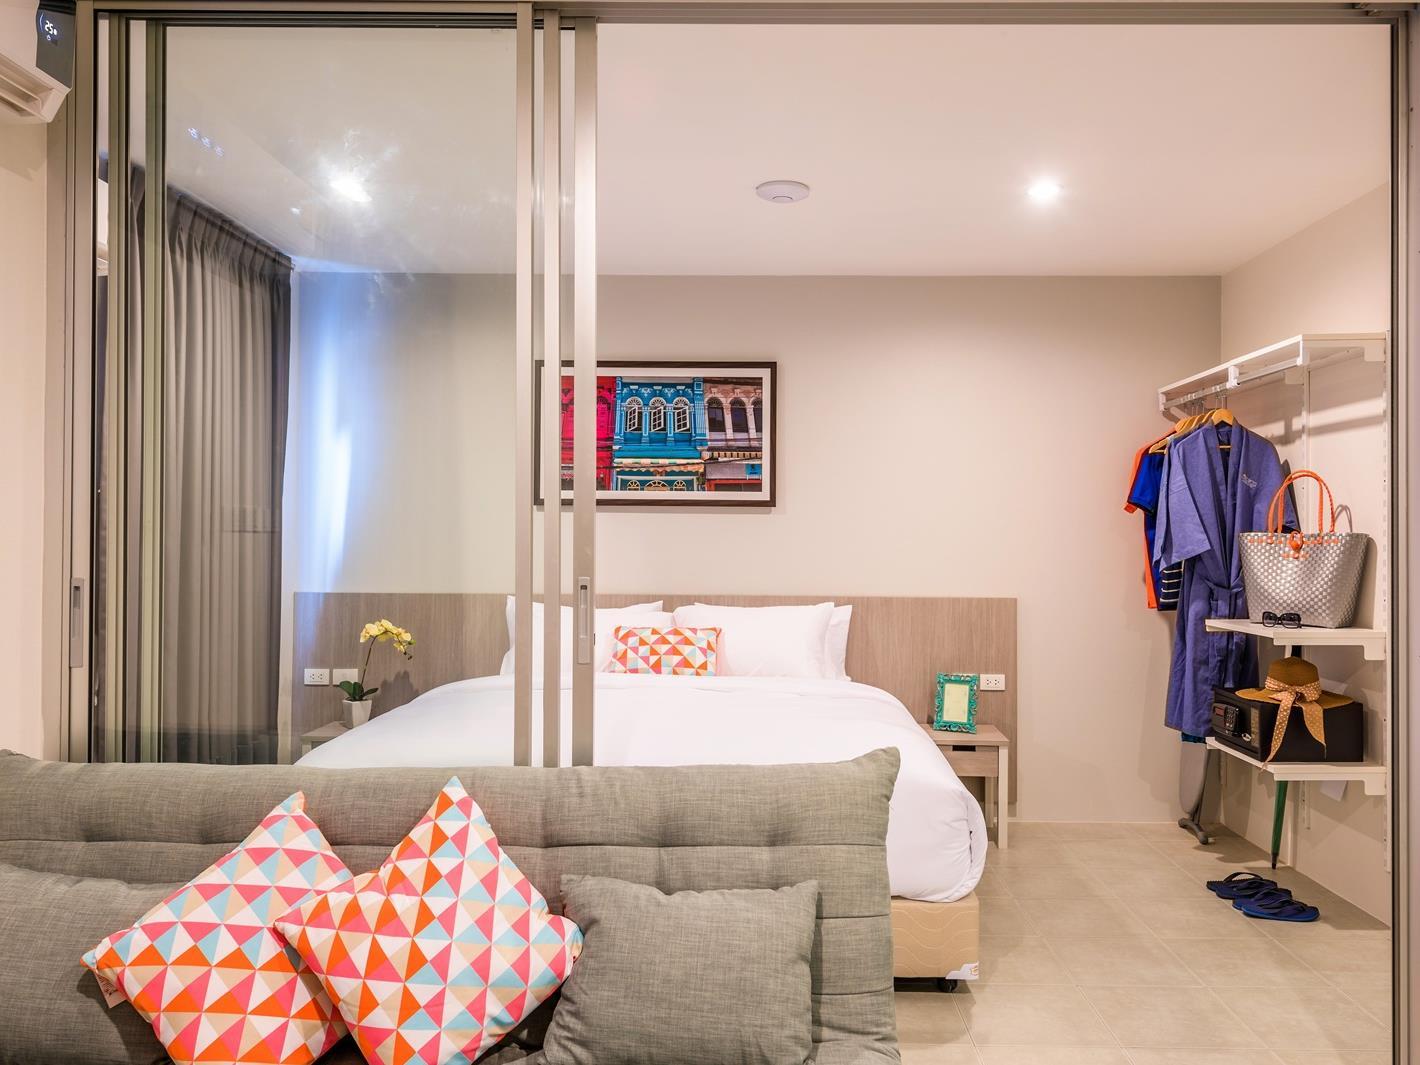 Recenta Suite Phuket Suanluang Phuket Island FAQ 2016, What facilities are there in Recenta Suite Phuket Suanluang Phuket Island 2016, What Languages Spoken are Supported in Recenta Suite Phuket Suanluang Phuket Island 2016, Which payment cards are accepted in Recenta Suite Phuket Suanluang Phuket Island , Phuket Island Recenta Suite Phuket Suanluang room facilities and services Q&A 2016, Phuket Island Recenta Suite Phuket Suanluang online booking services 2016, Phuket Island Recenta Suite Phuket Suanluang address 2016, Phuket Island Recenta Suite Phuket Suanluang telephone number 2016,Phuket Island Recenta Suite Phuket Suanluang map 2016, Phuket Island Recenta Suite Phuket Suanluang traffic guide 2016, how to go Phuket Island Recenta Suite Phuket Suanluang, Phuket Island Recenta Suite Phuket Suanluang booking online 2016, Phuket Island Recenta Suite Phuket Suanluang room types 2016.